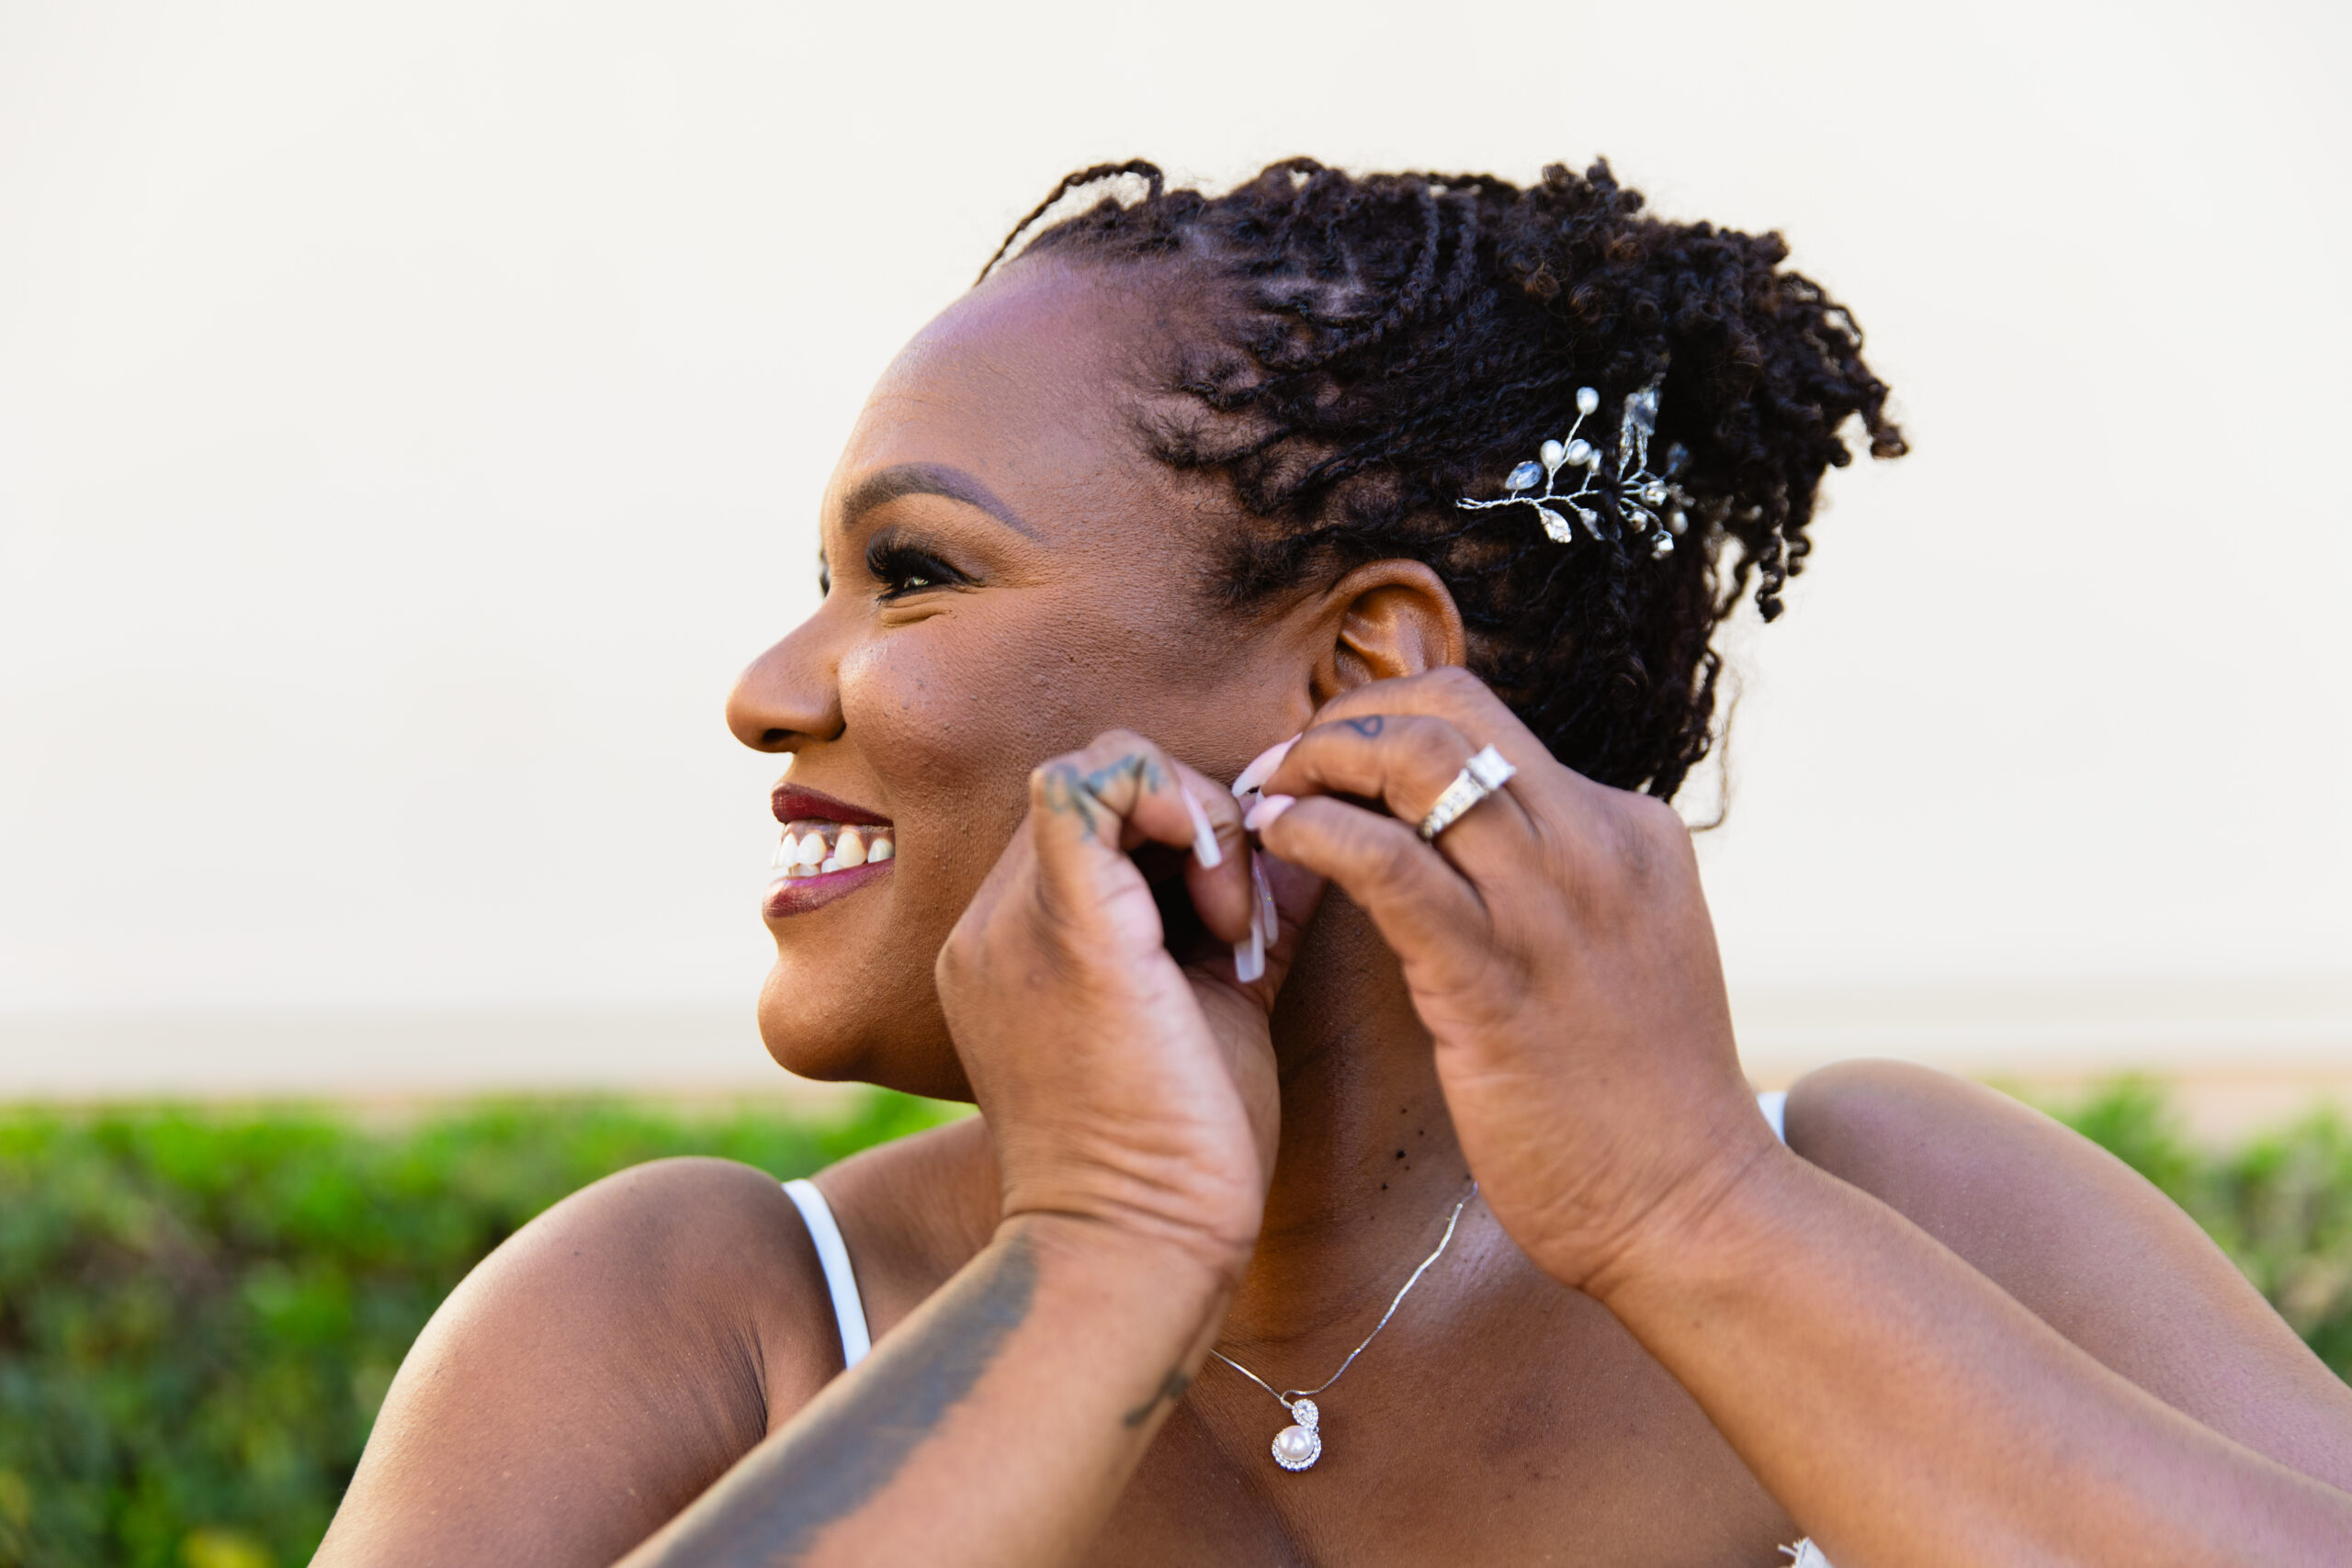 Bride adjusting her earrings on her wedding day by Phoenix wedding photographers Juniper and Co Photography.